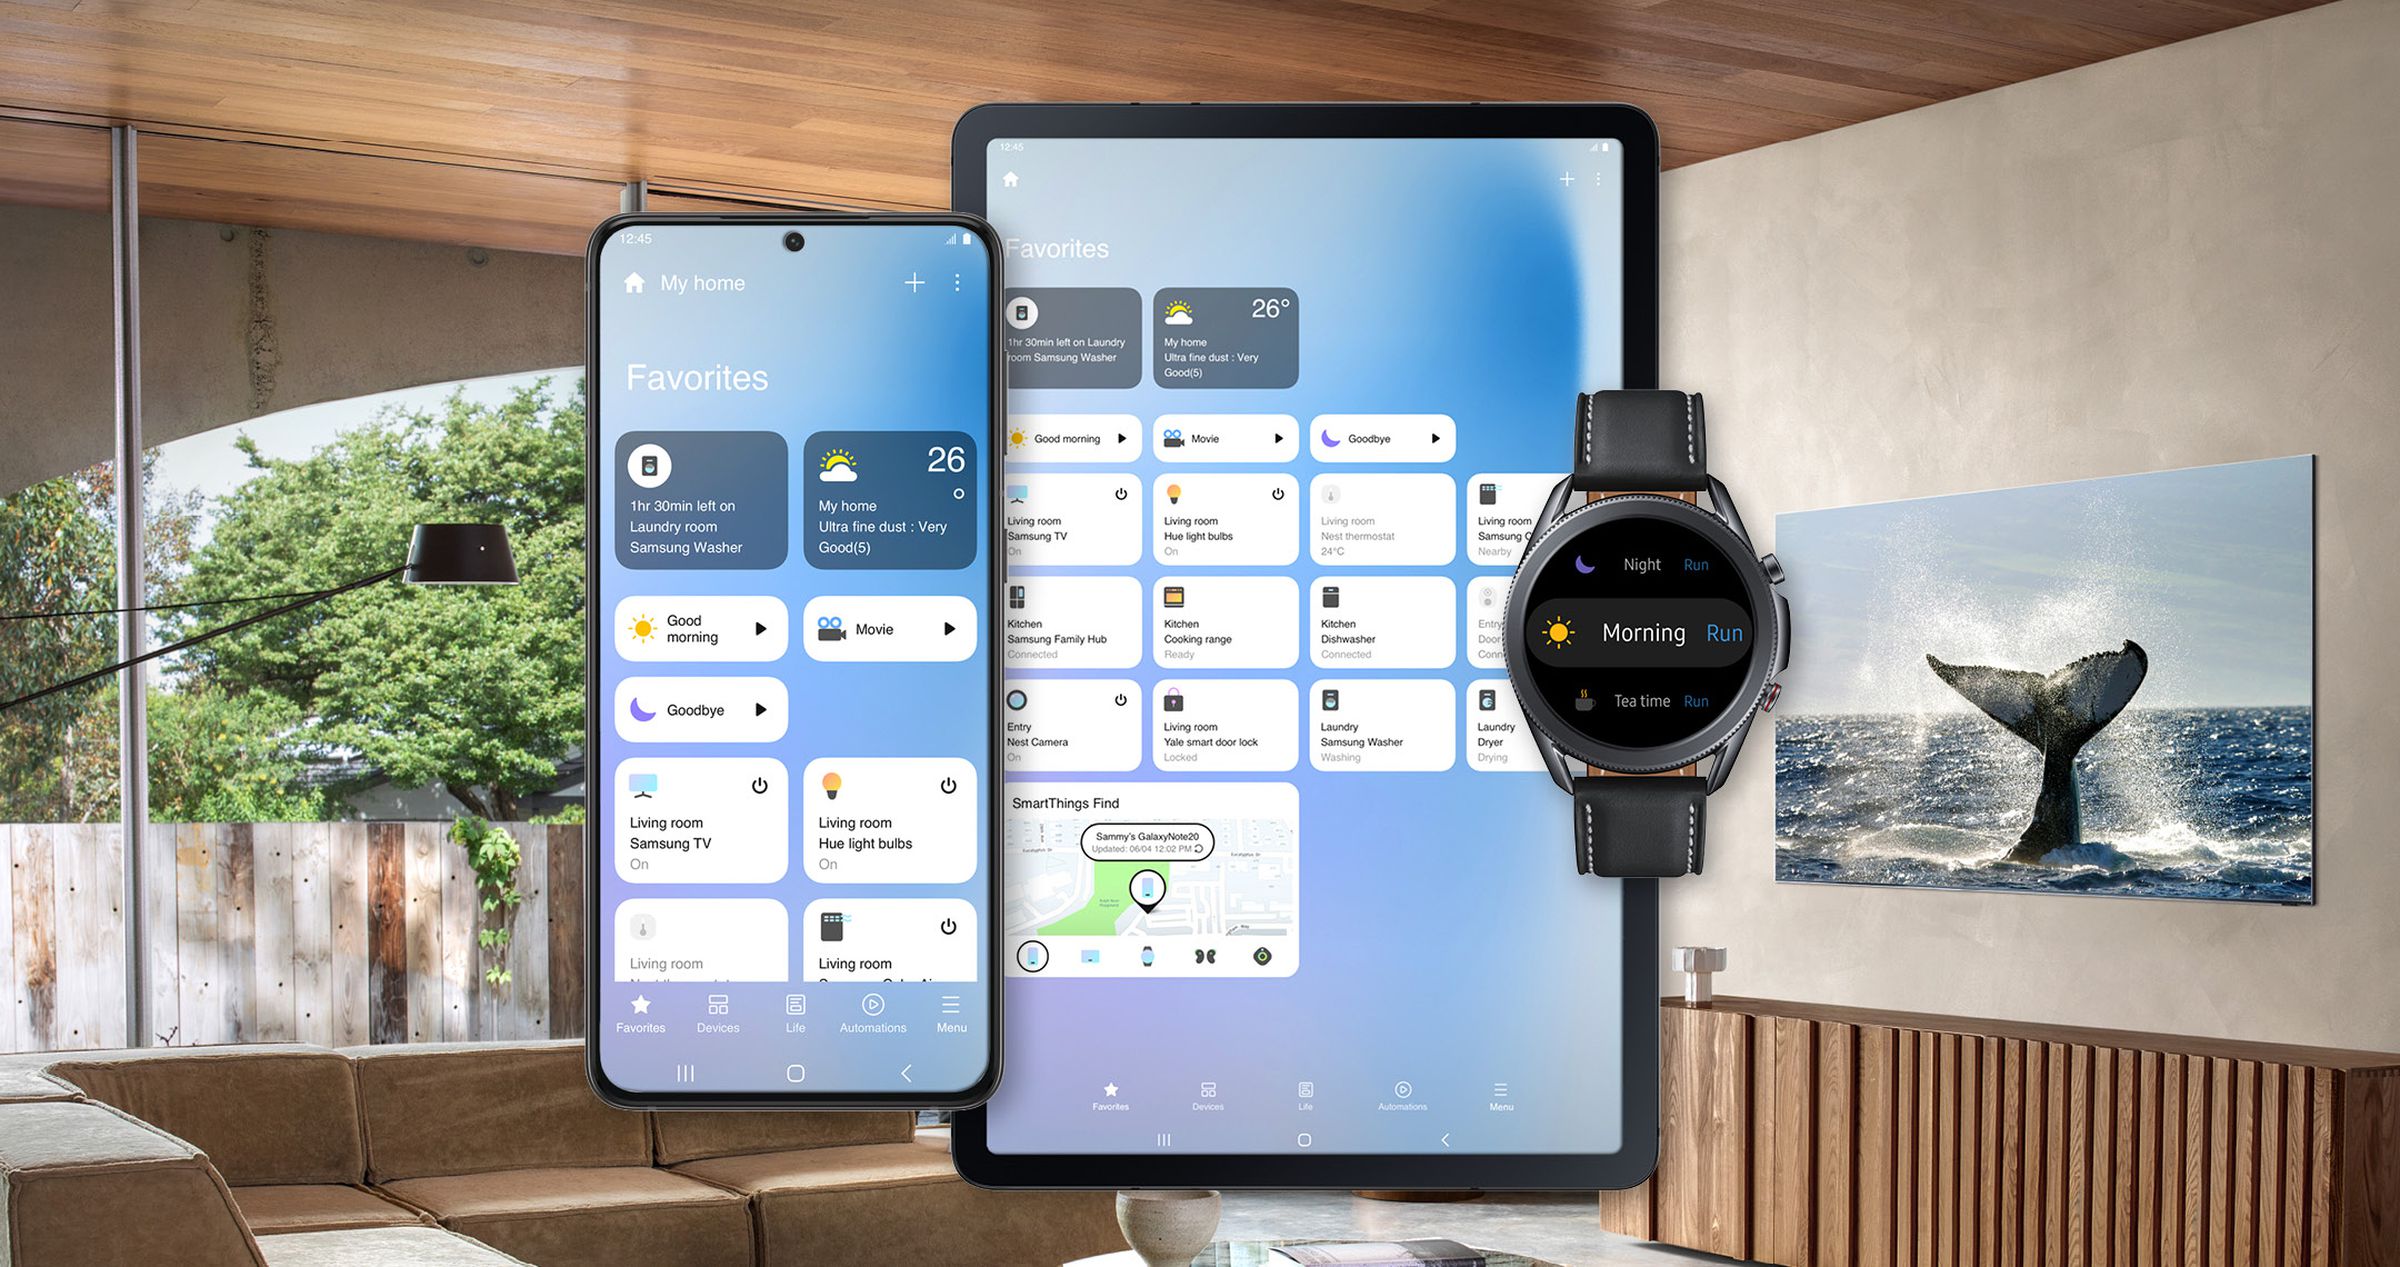 Samsung’s SmartThings app works with both third-party connected devices and Samsung’s smart appliances.